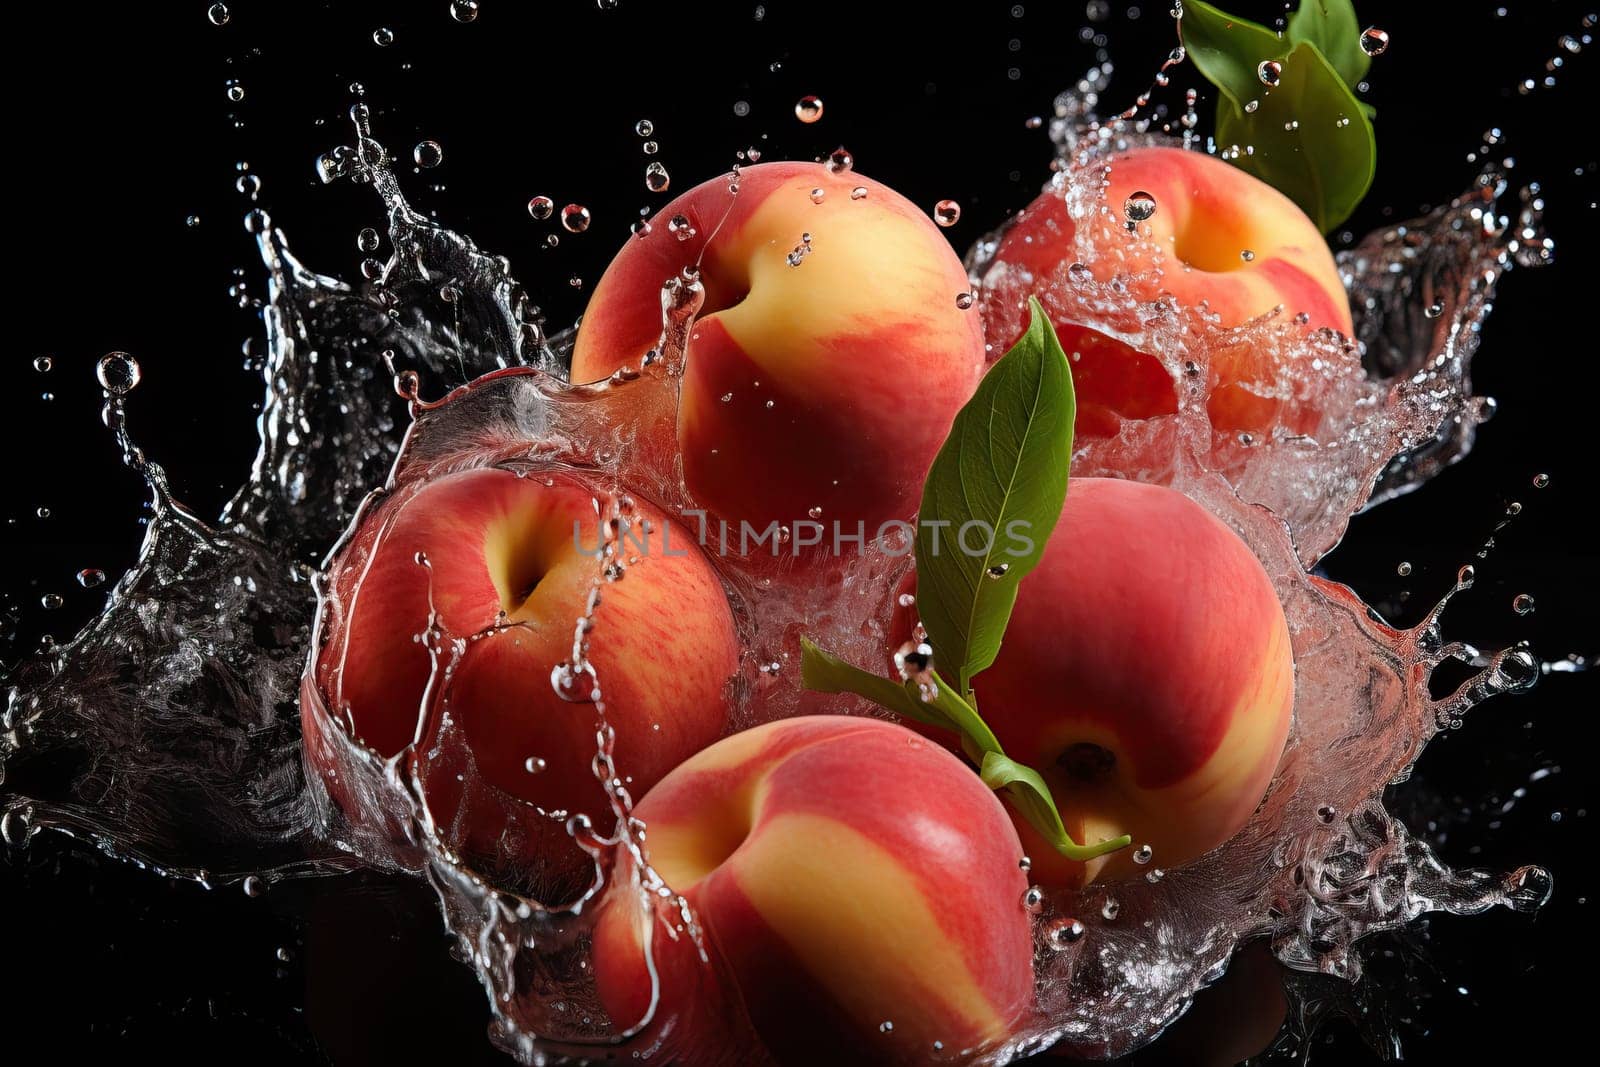 Nectarine in water with bubbles on black background, water splashes from fruit falling into water, close-up of nectarine in water.